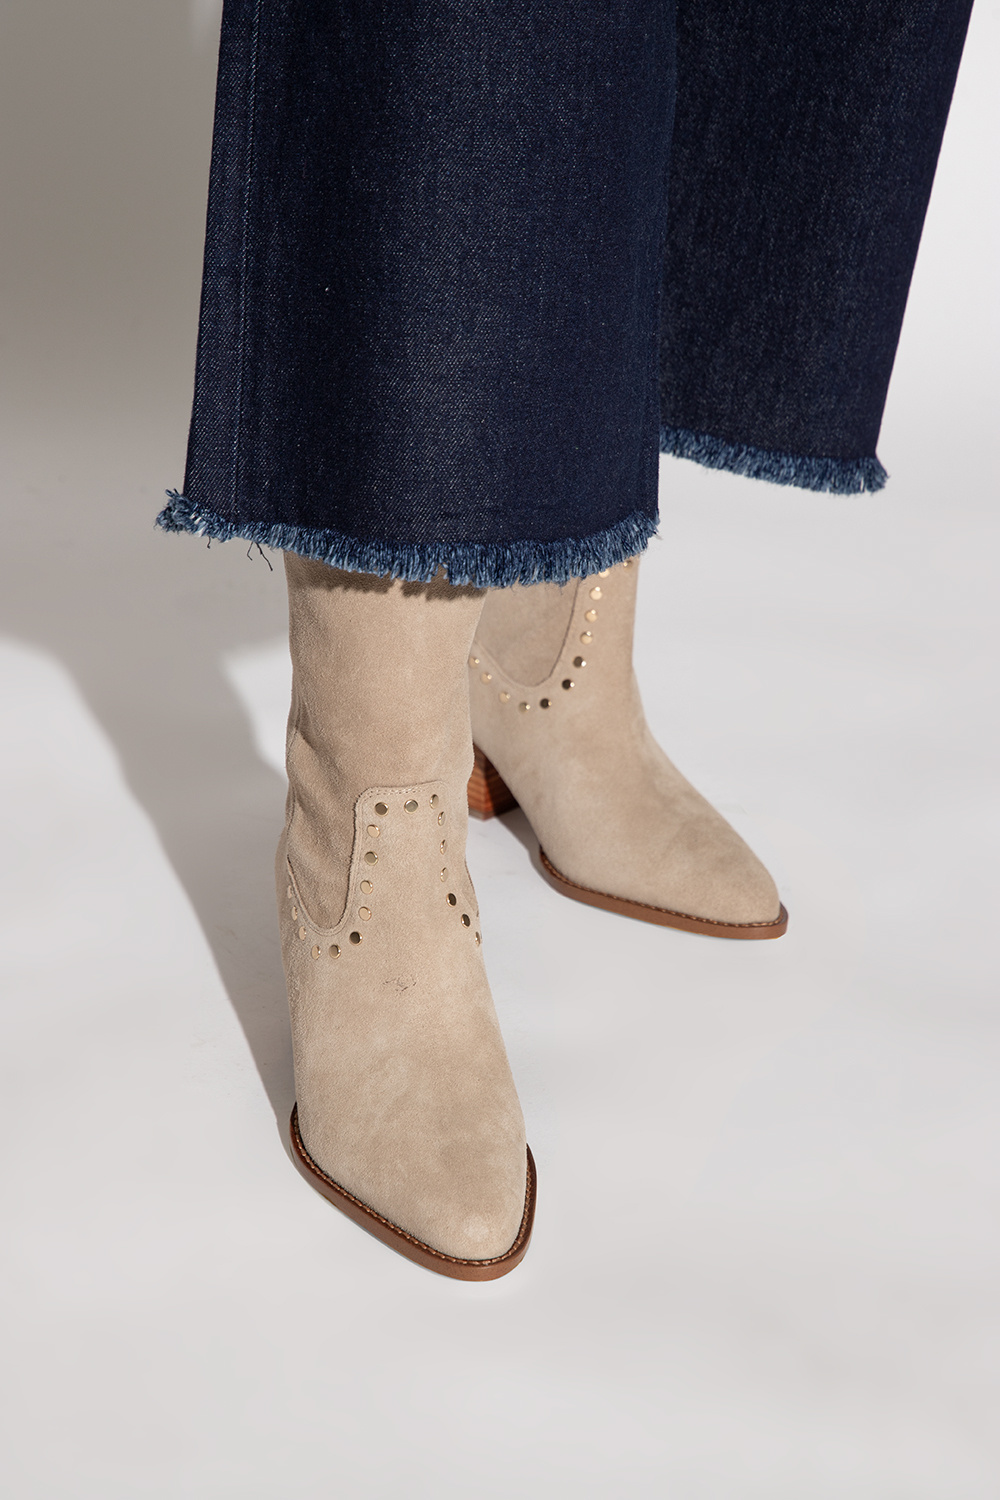 Coach 'Phoebe' heeled suede ankle boots | Women's Shoes | Vitkac